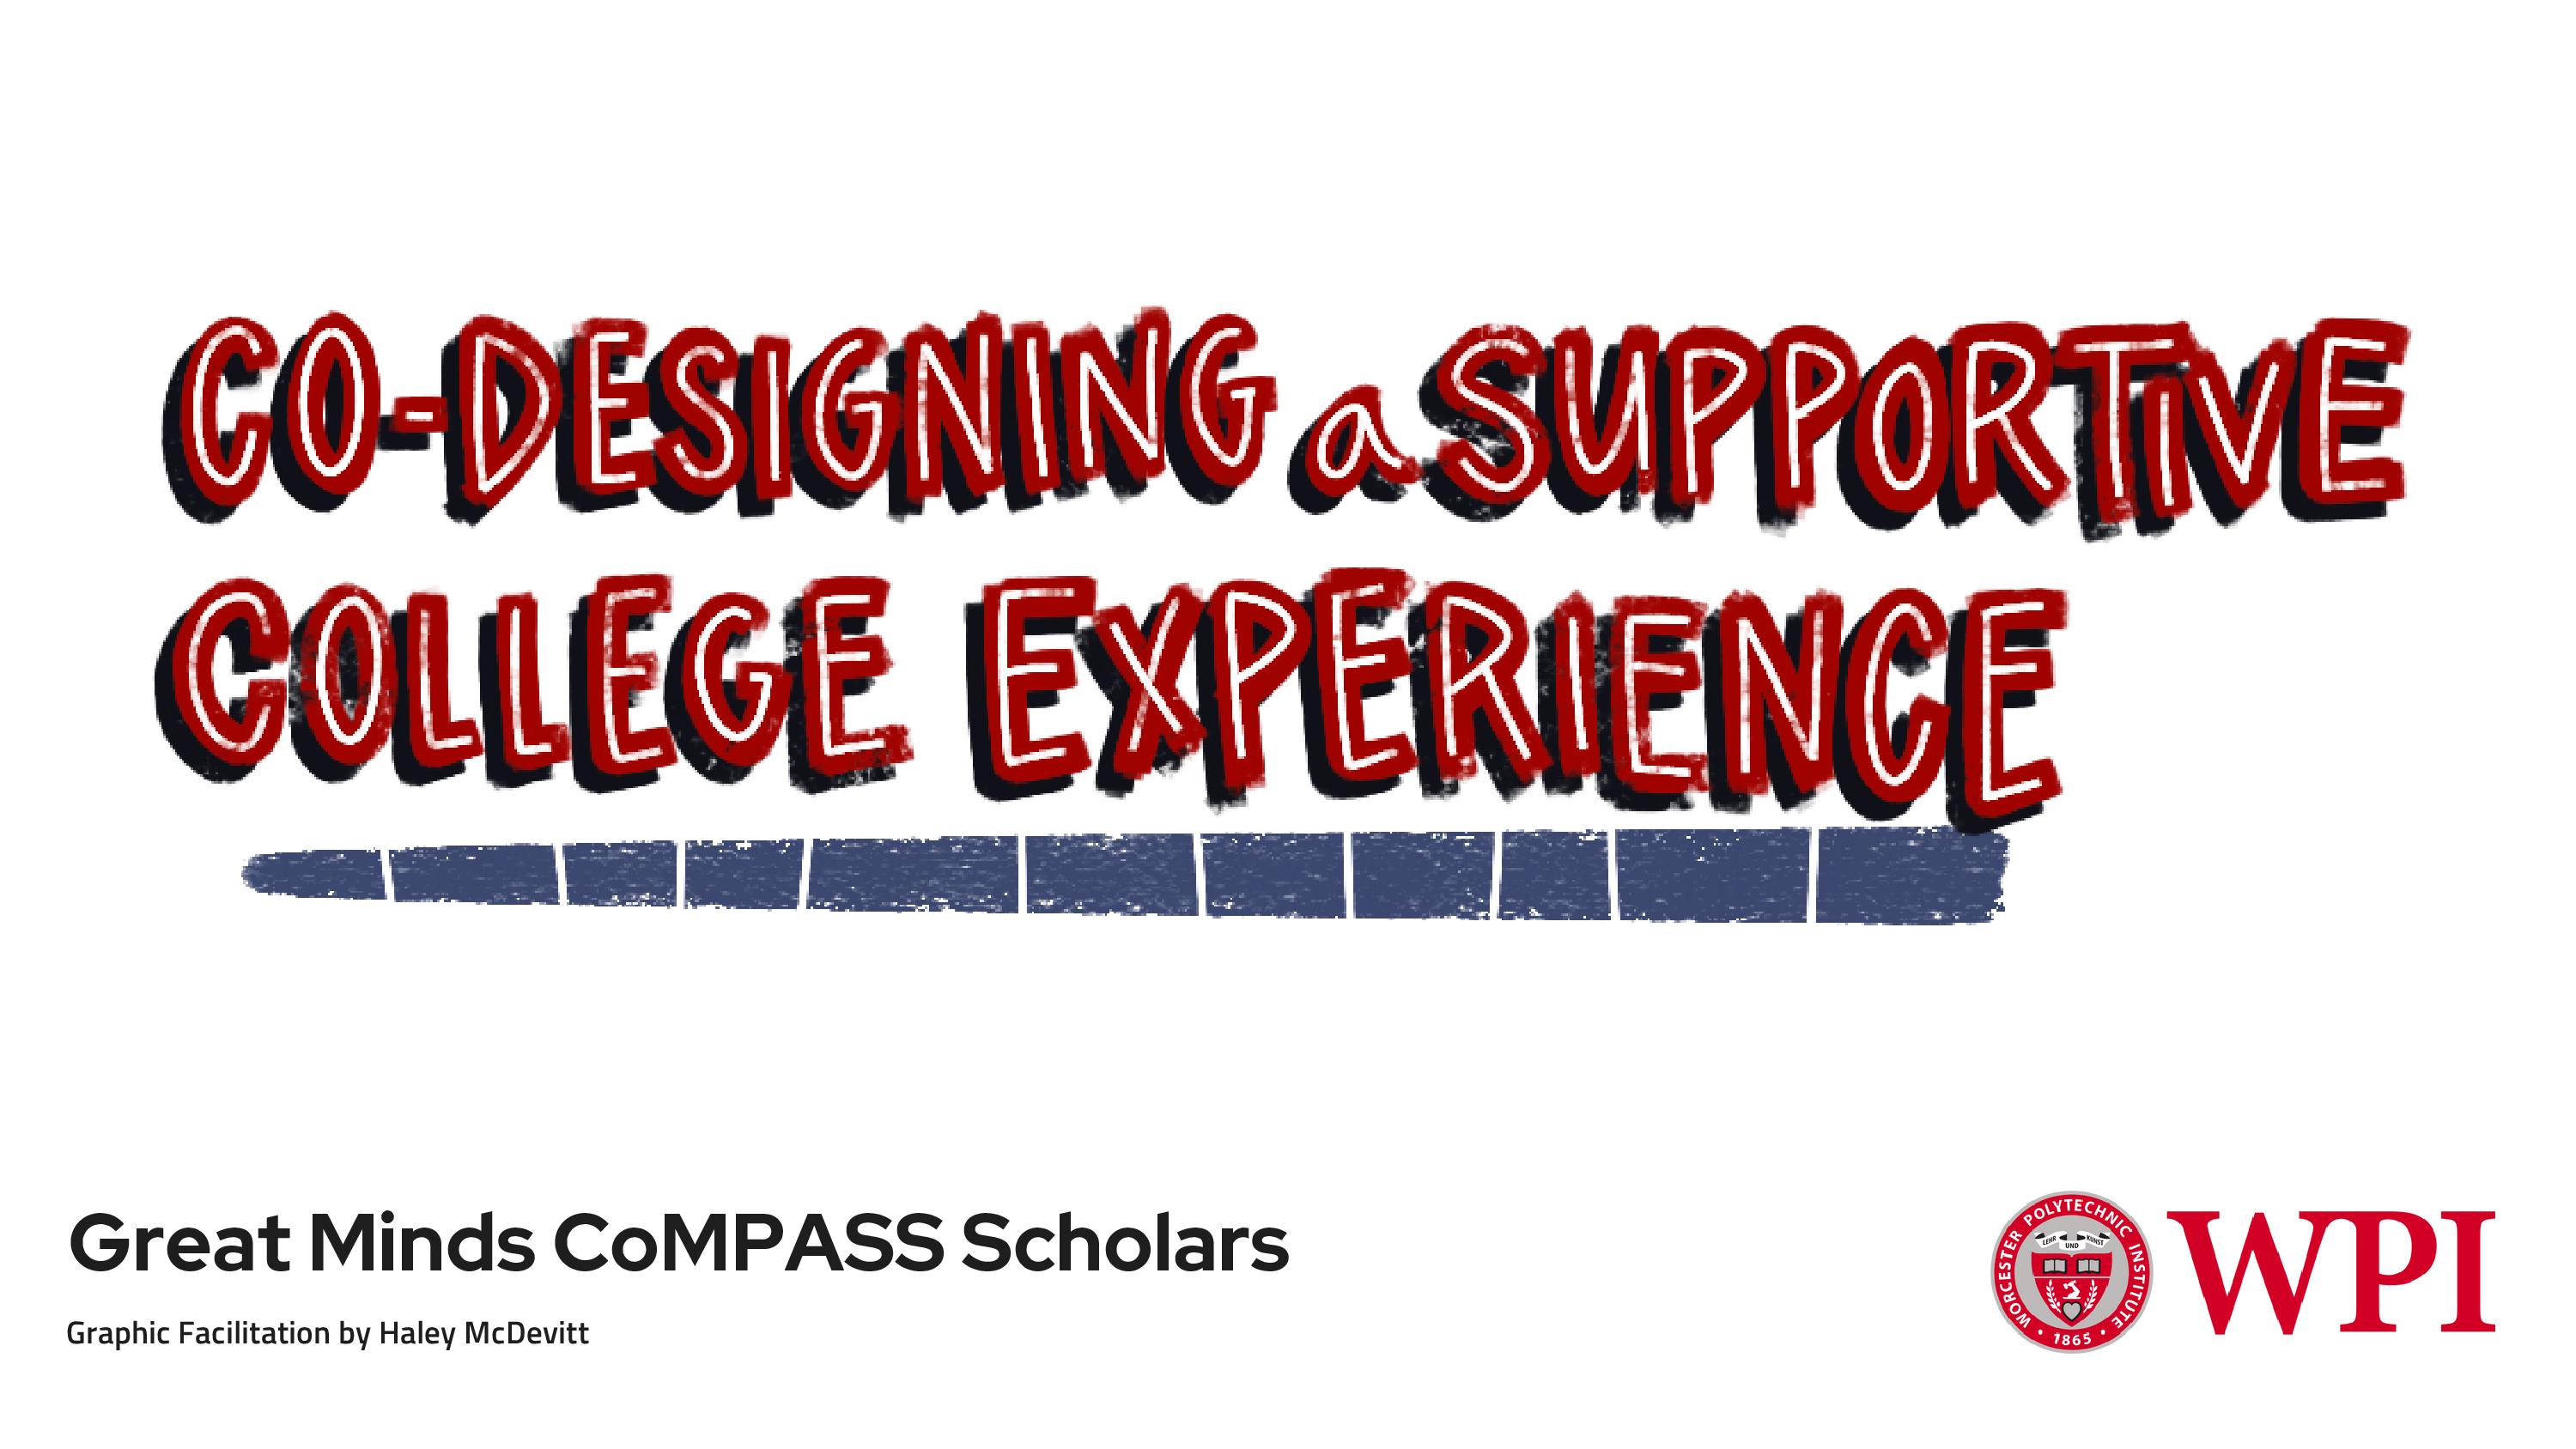 Slide with the words "Co-Designing a supportive college experience"